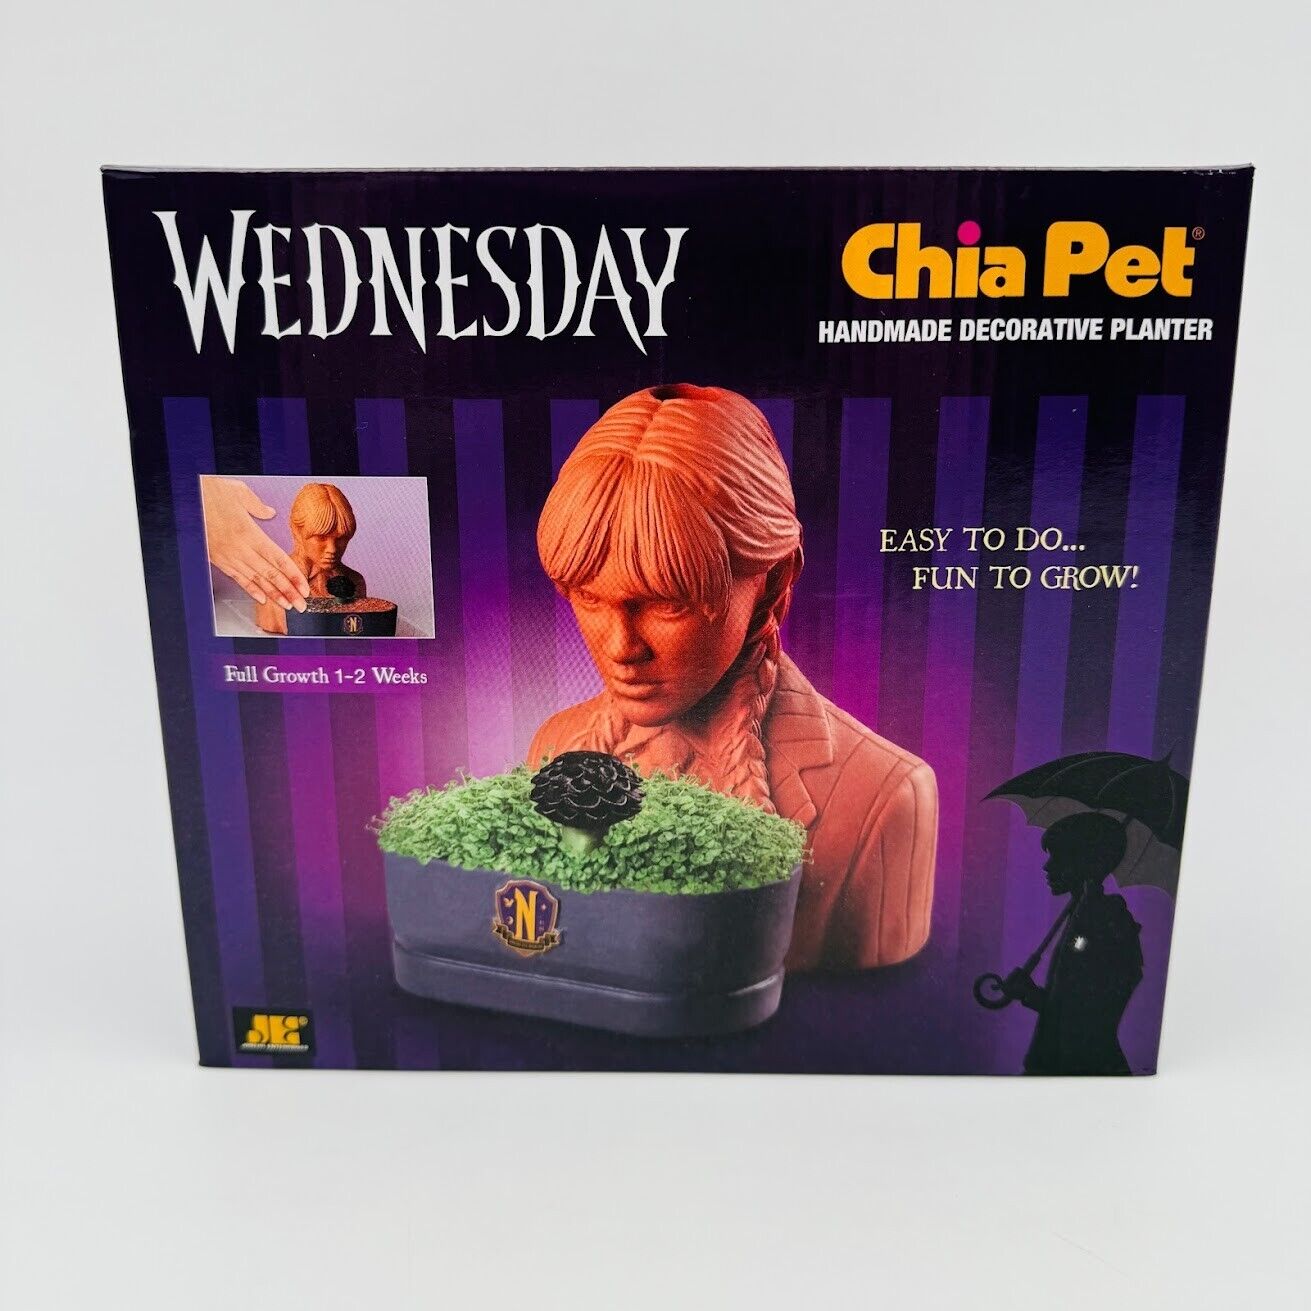 Chia Pet Wednesday with Seed Pack Decorative Pottery Planter The Addams Family